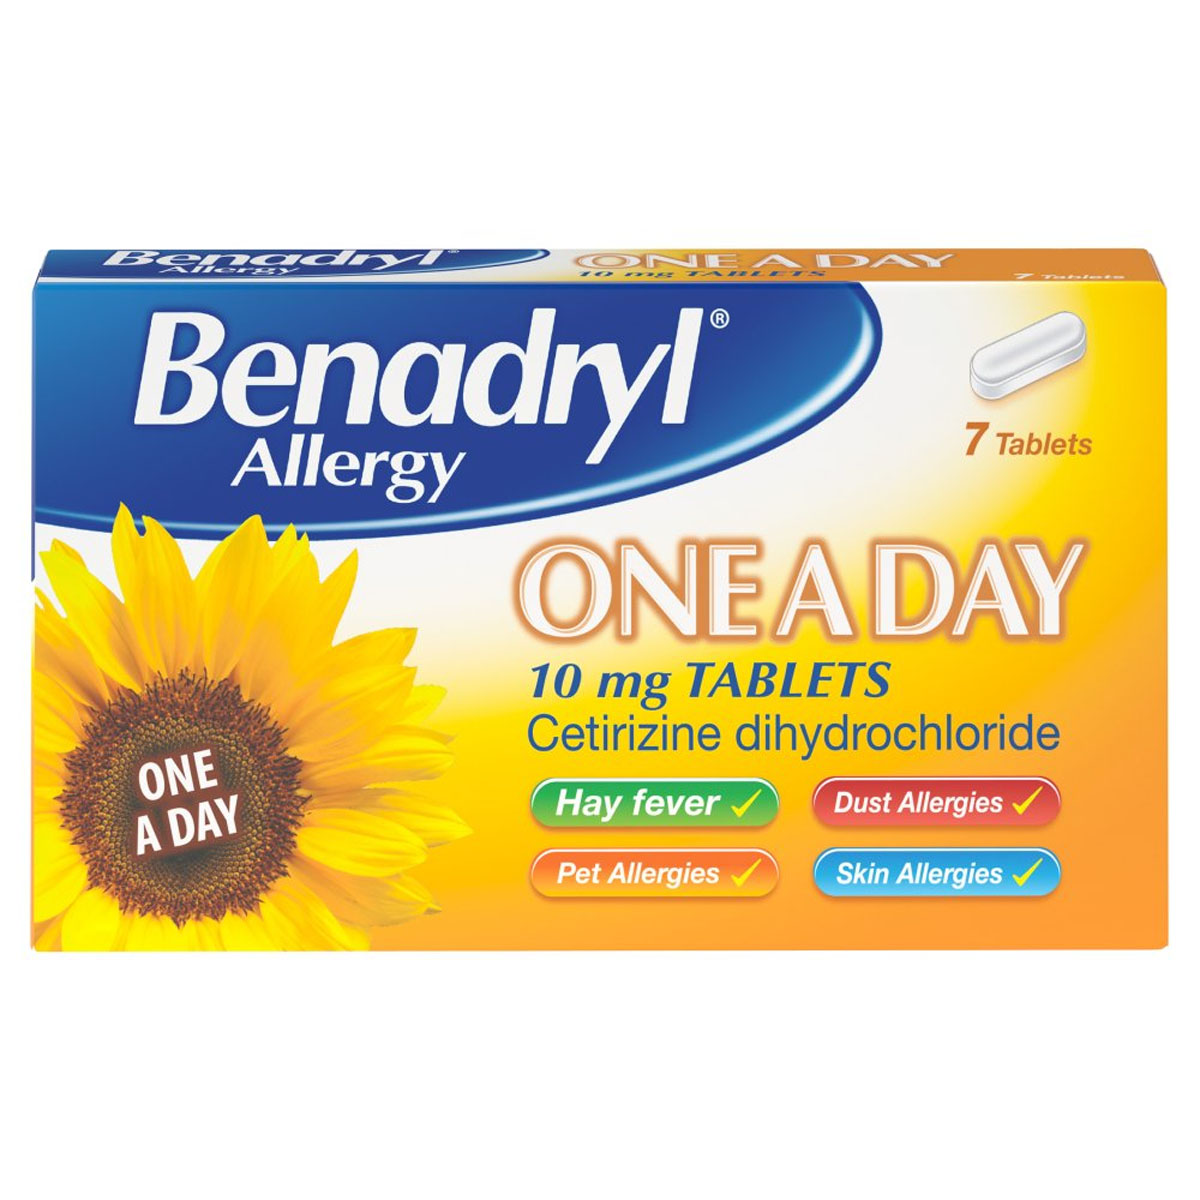 Benadryl - 7 One a Day Allergy Tablets - Continental Food Store